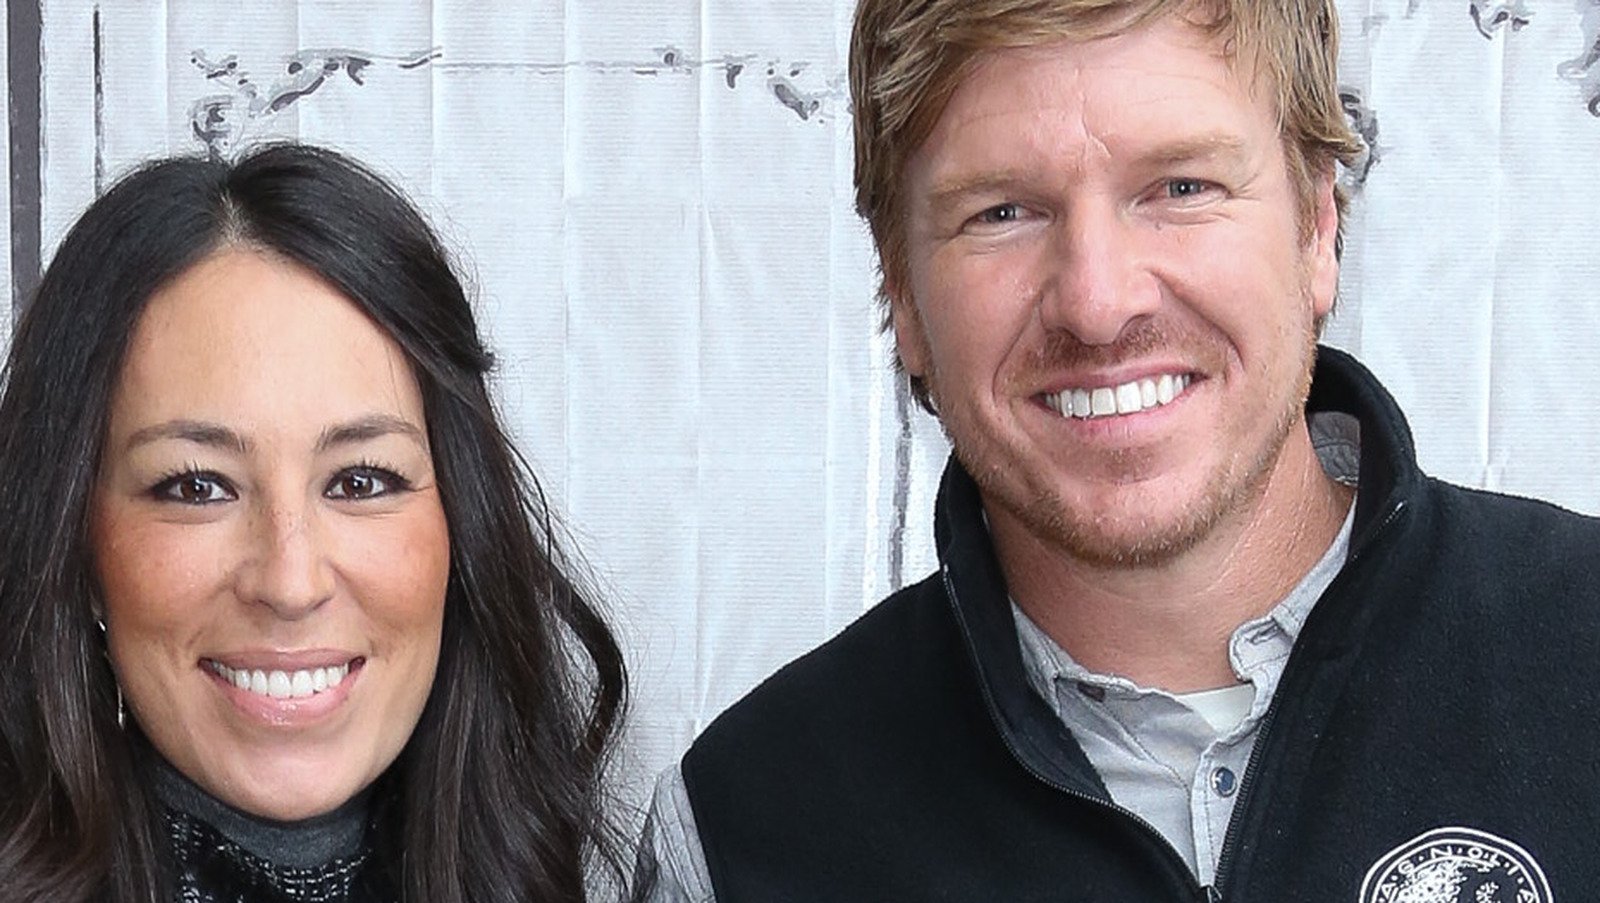 The Home Design Trends That Chip And Joanna Gaines Aren't Using Anymore